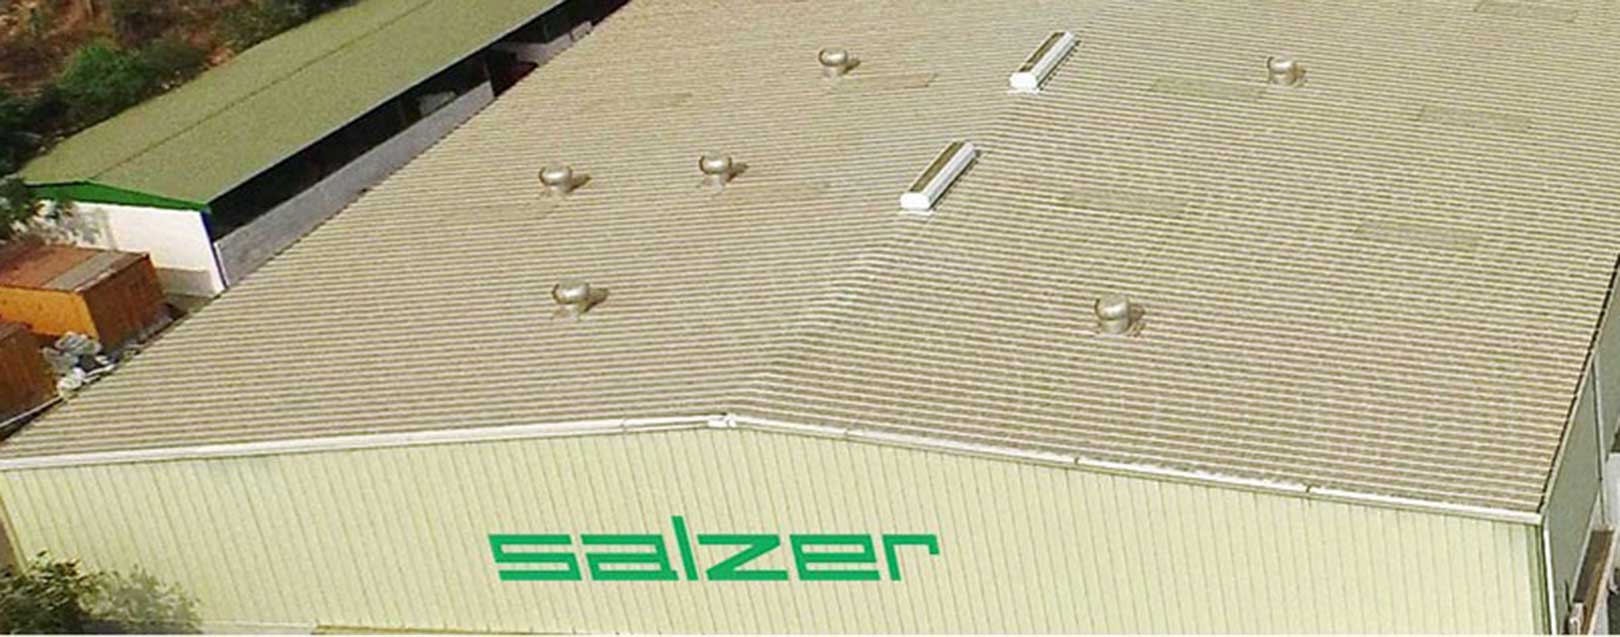 Salzer Electronics eyeing 15% CAGR, Rs.1000 cr revenue by 2021